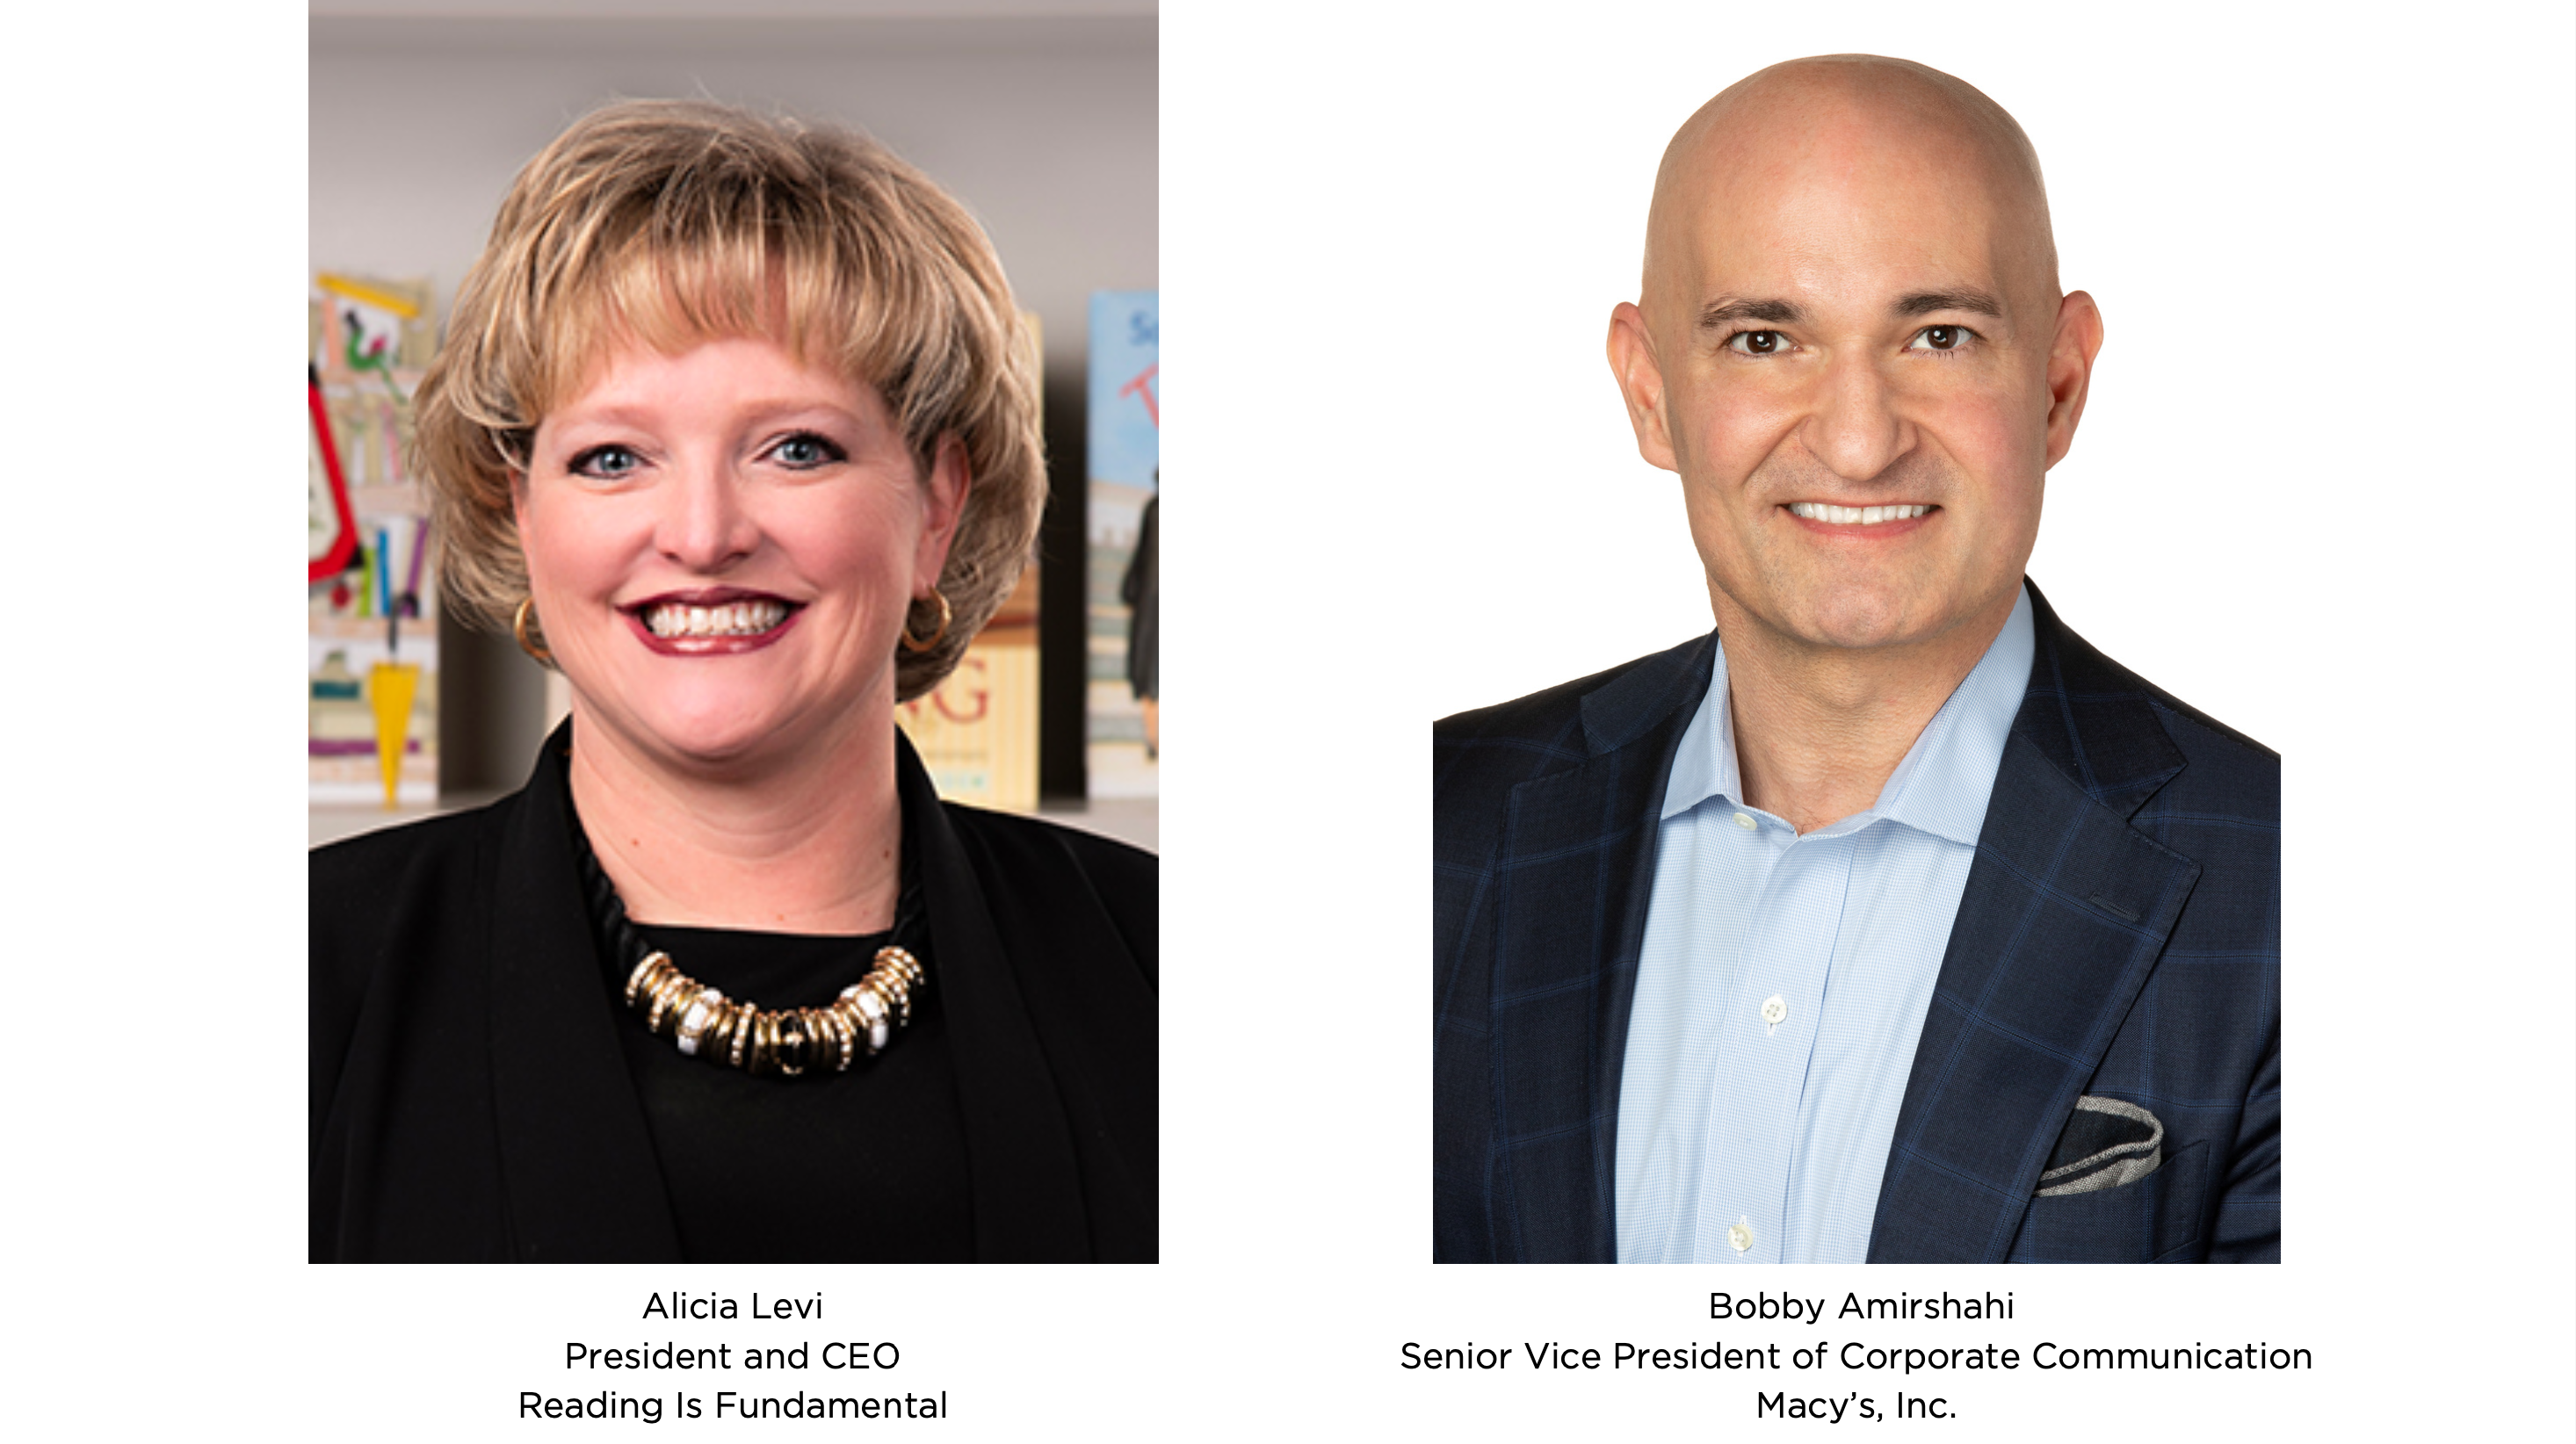 Alicia Levi, the President & CEO of Reading Is Fundamental, and Bobby Amirshahi, the Senior Vice President of Corporate Communication for Macy's Inc.